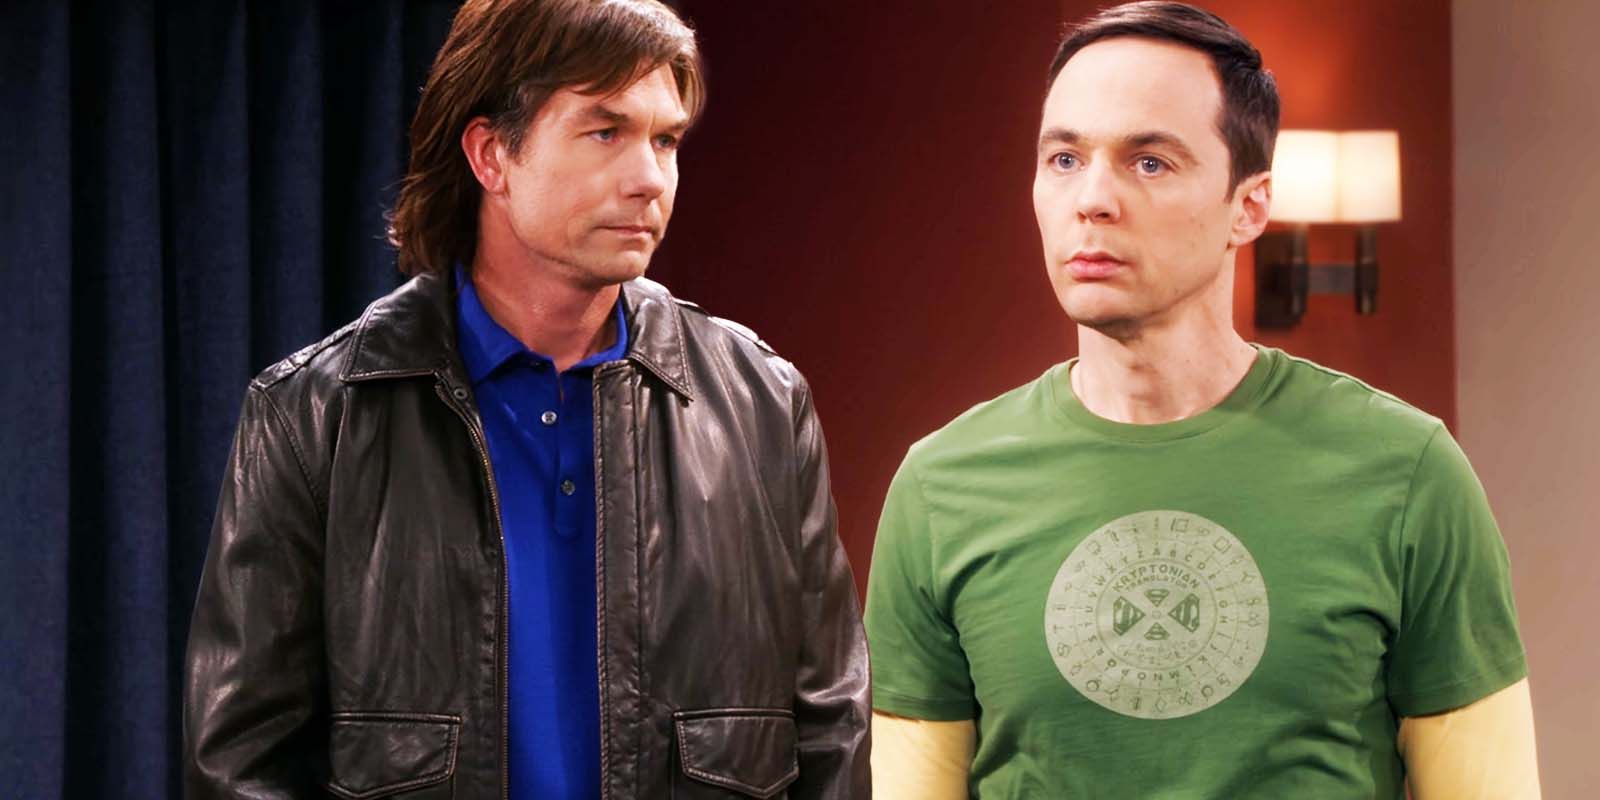 Jerry O'Connell as Georgie Cooper and Jim Parsons as Sheldon Cooper in The Big Bang Theory season 11